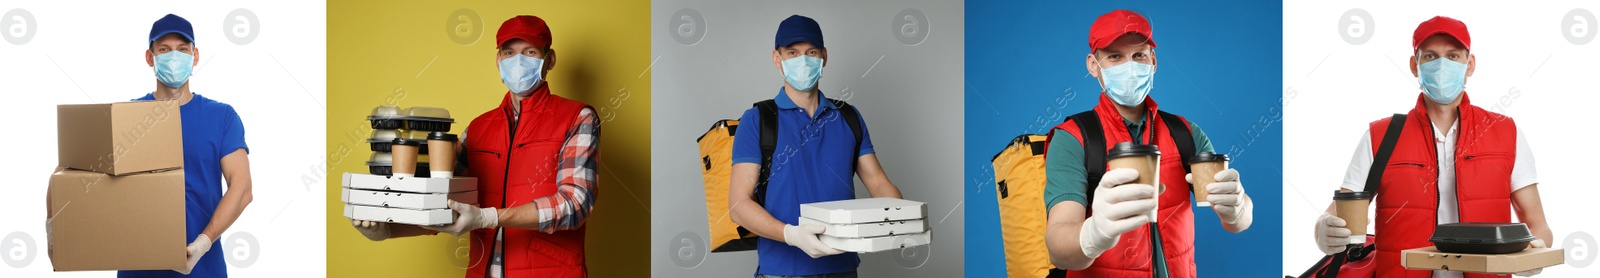 Image of Collage with photos of courier in protective mask holding orders and boxes on color backgrounds, banner design. Delivery service during coronavirus quarantine